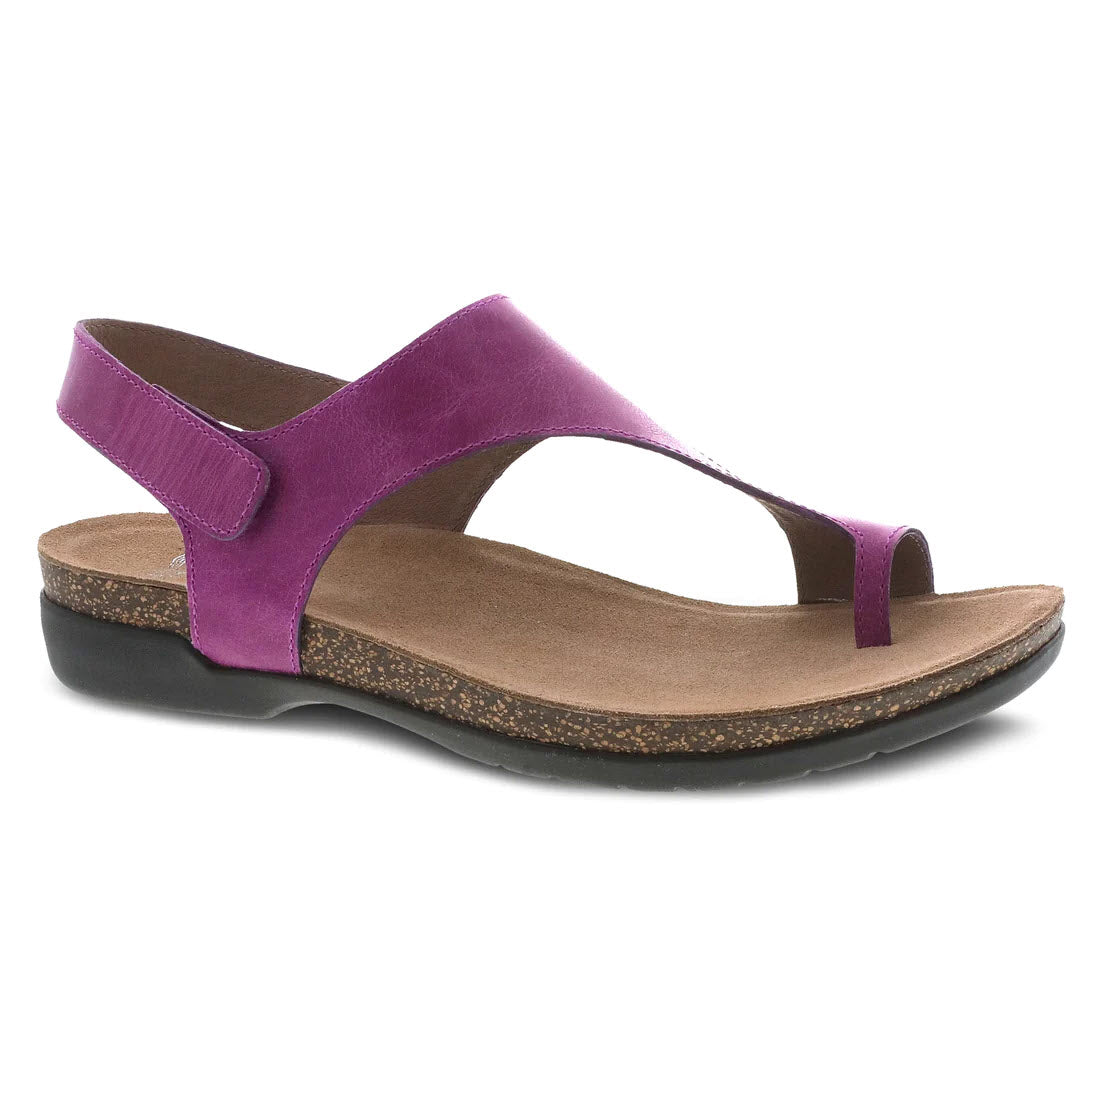 A single Dansko Reece Magenta leather women's sandal with a strap over the toes and an adjustable back strap, set against a white background.